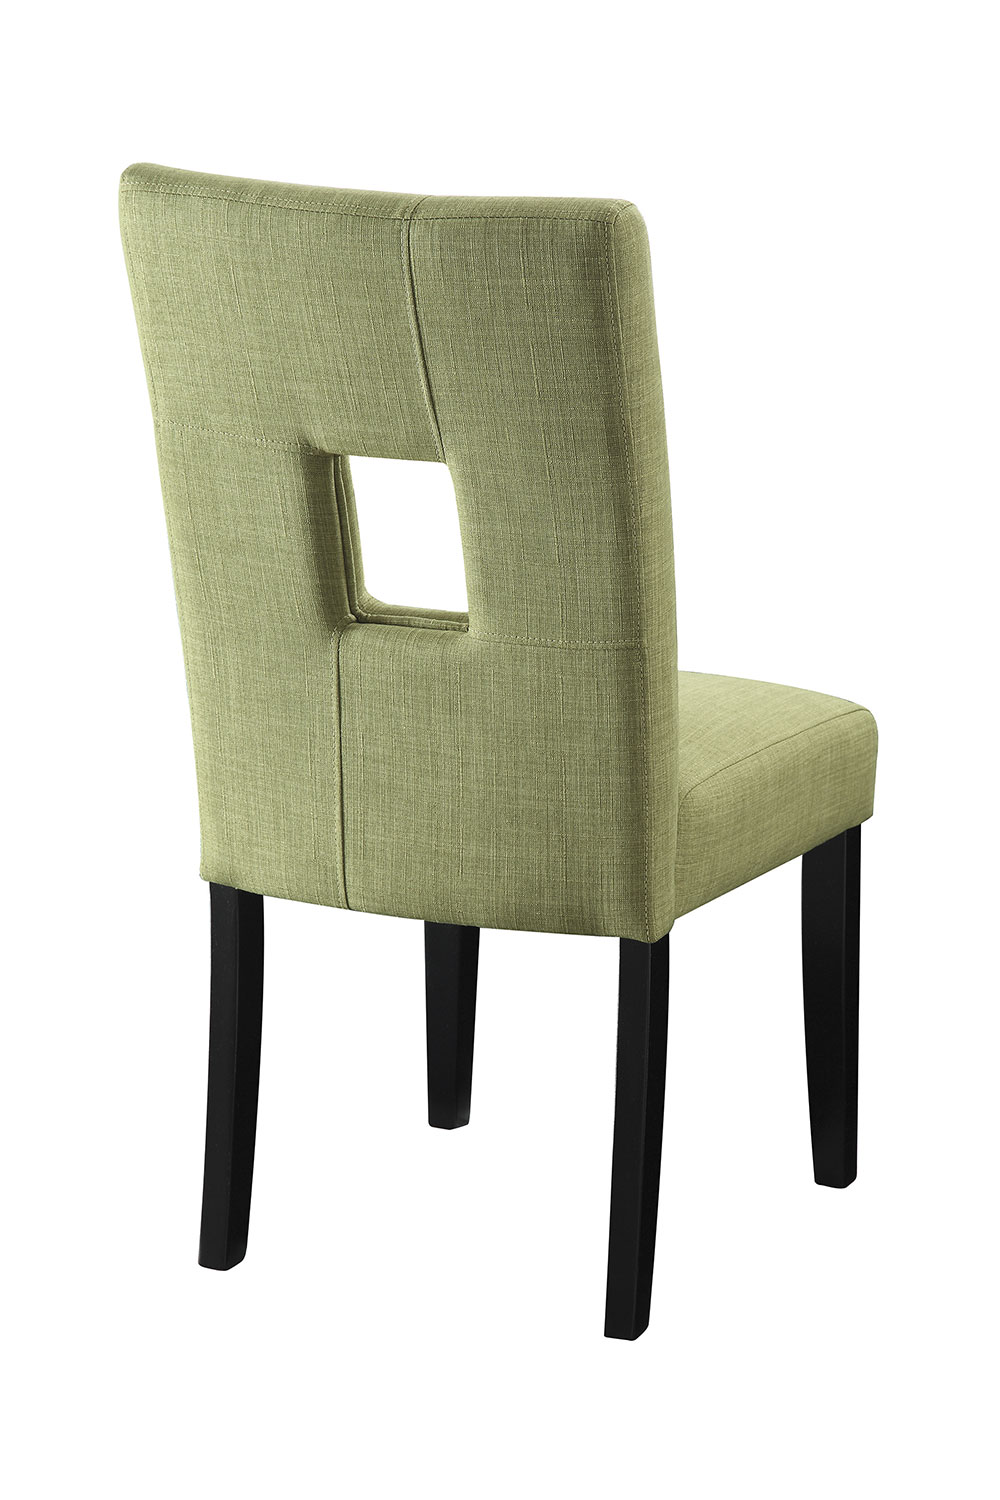 Coaster Andenne Dining Chair - Green/Black